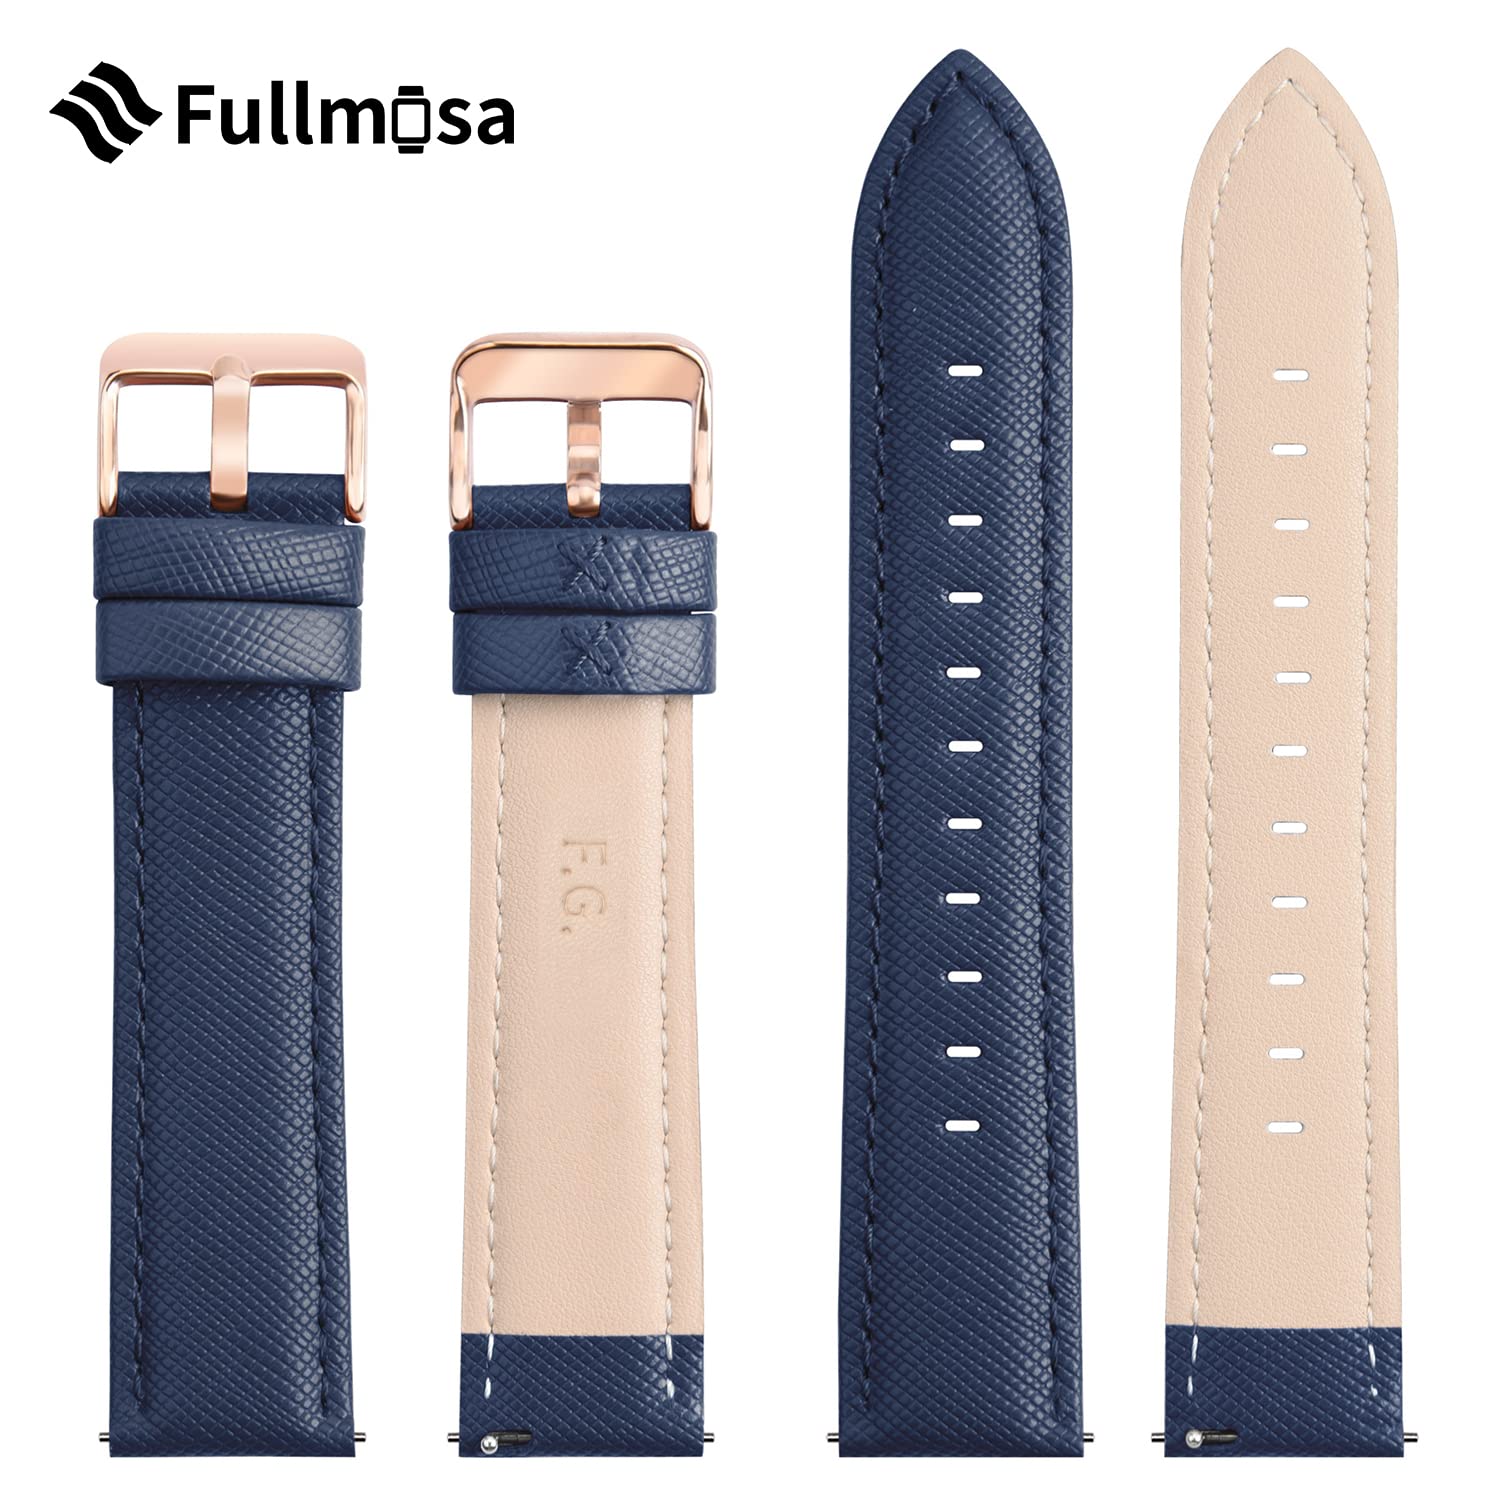 Fullmosa Cross Genuine Leather Watch Band 14mm 16mm 18mm 20mm 22mm 24mm, Quick Release Strap for Men and Women, Fits Samsung Galaxy Watch 6/5/4/3,Garmin Watch,Huawei,Fossil,Seiko,Citizen,Ticwatch